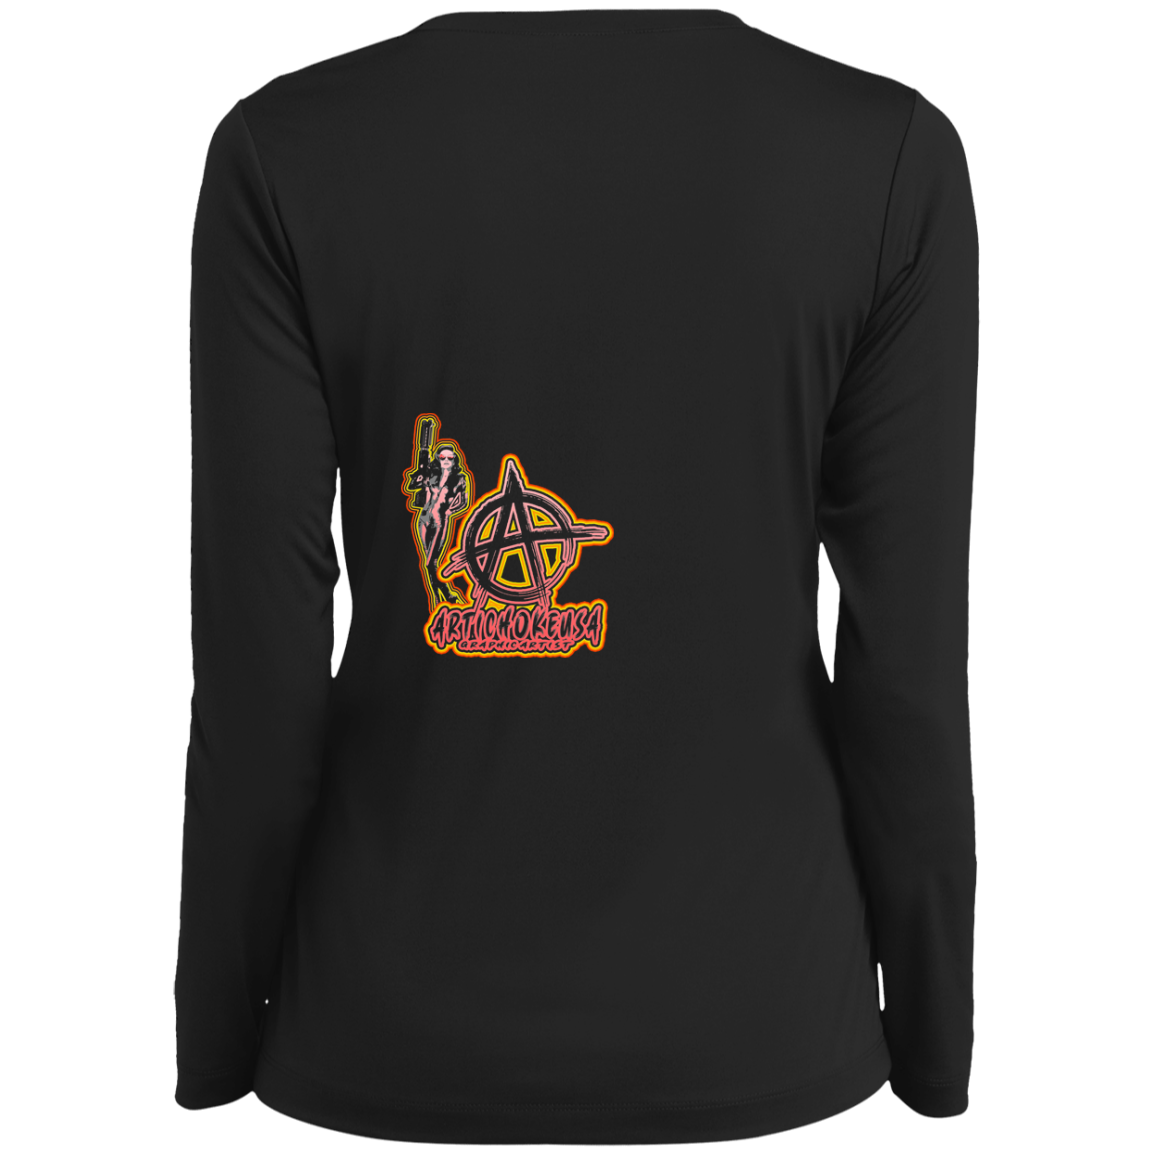 ArtichokeUSA Character and Font design. Let's Create Your Own Team Design Today. Mary Boom Boom. Ladies’ Long Sleeve Performance V-Neck Tee